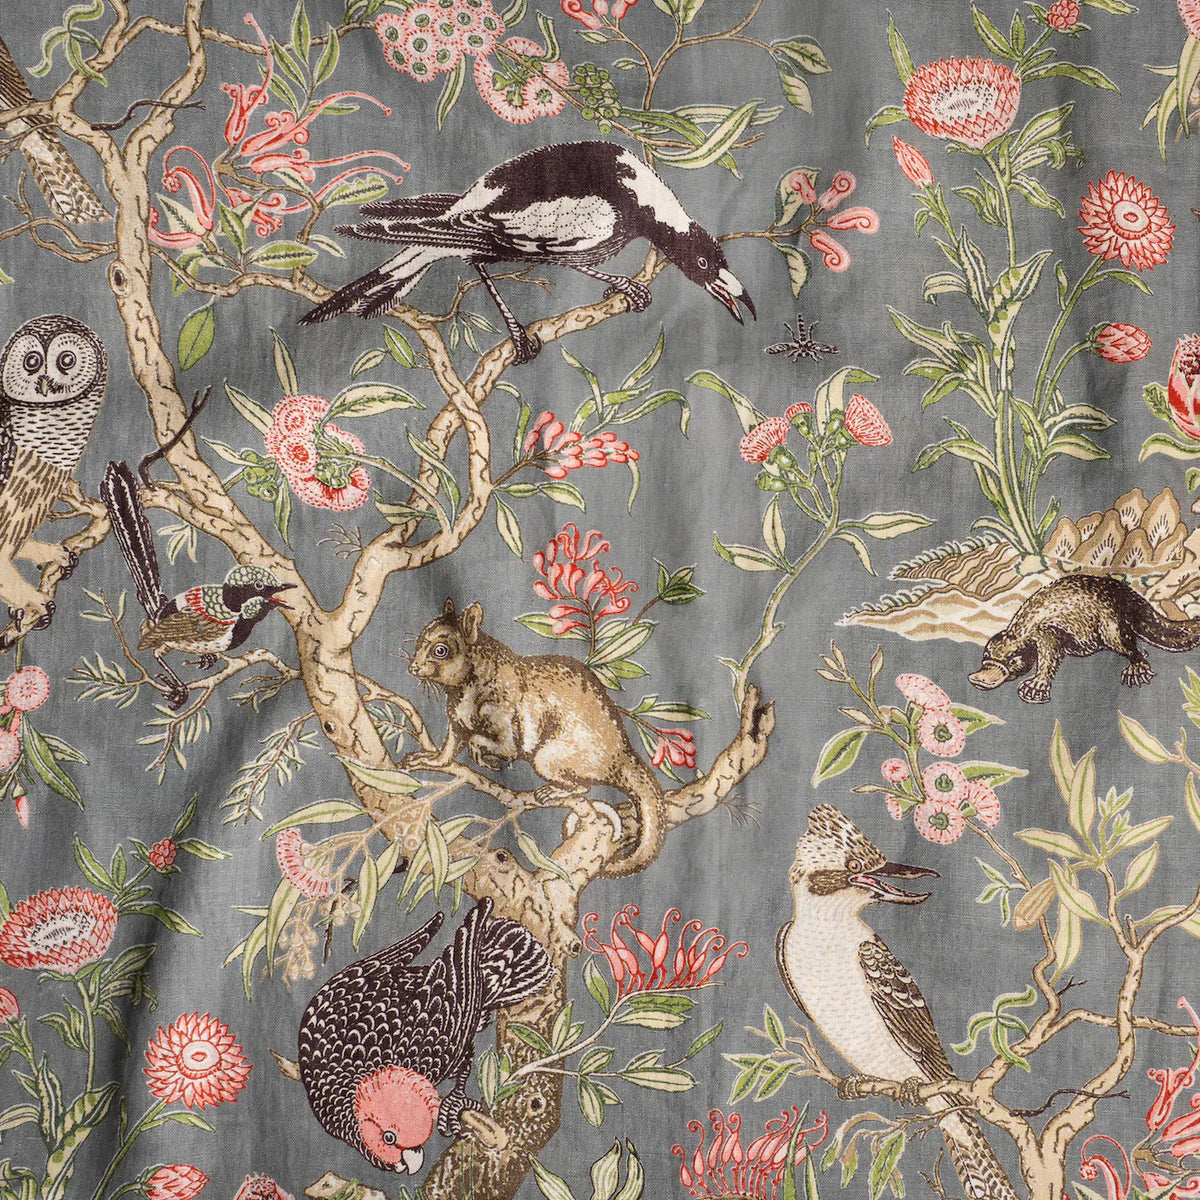 Draped fabric in an animal and tree branch print in brown, gray, red and green on a dark gray field.